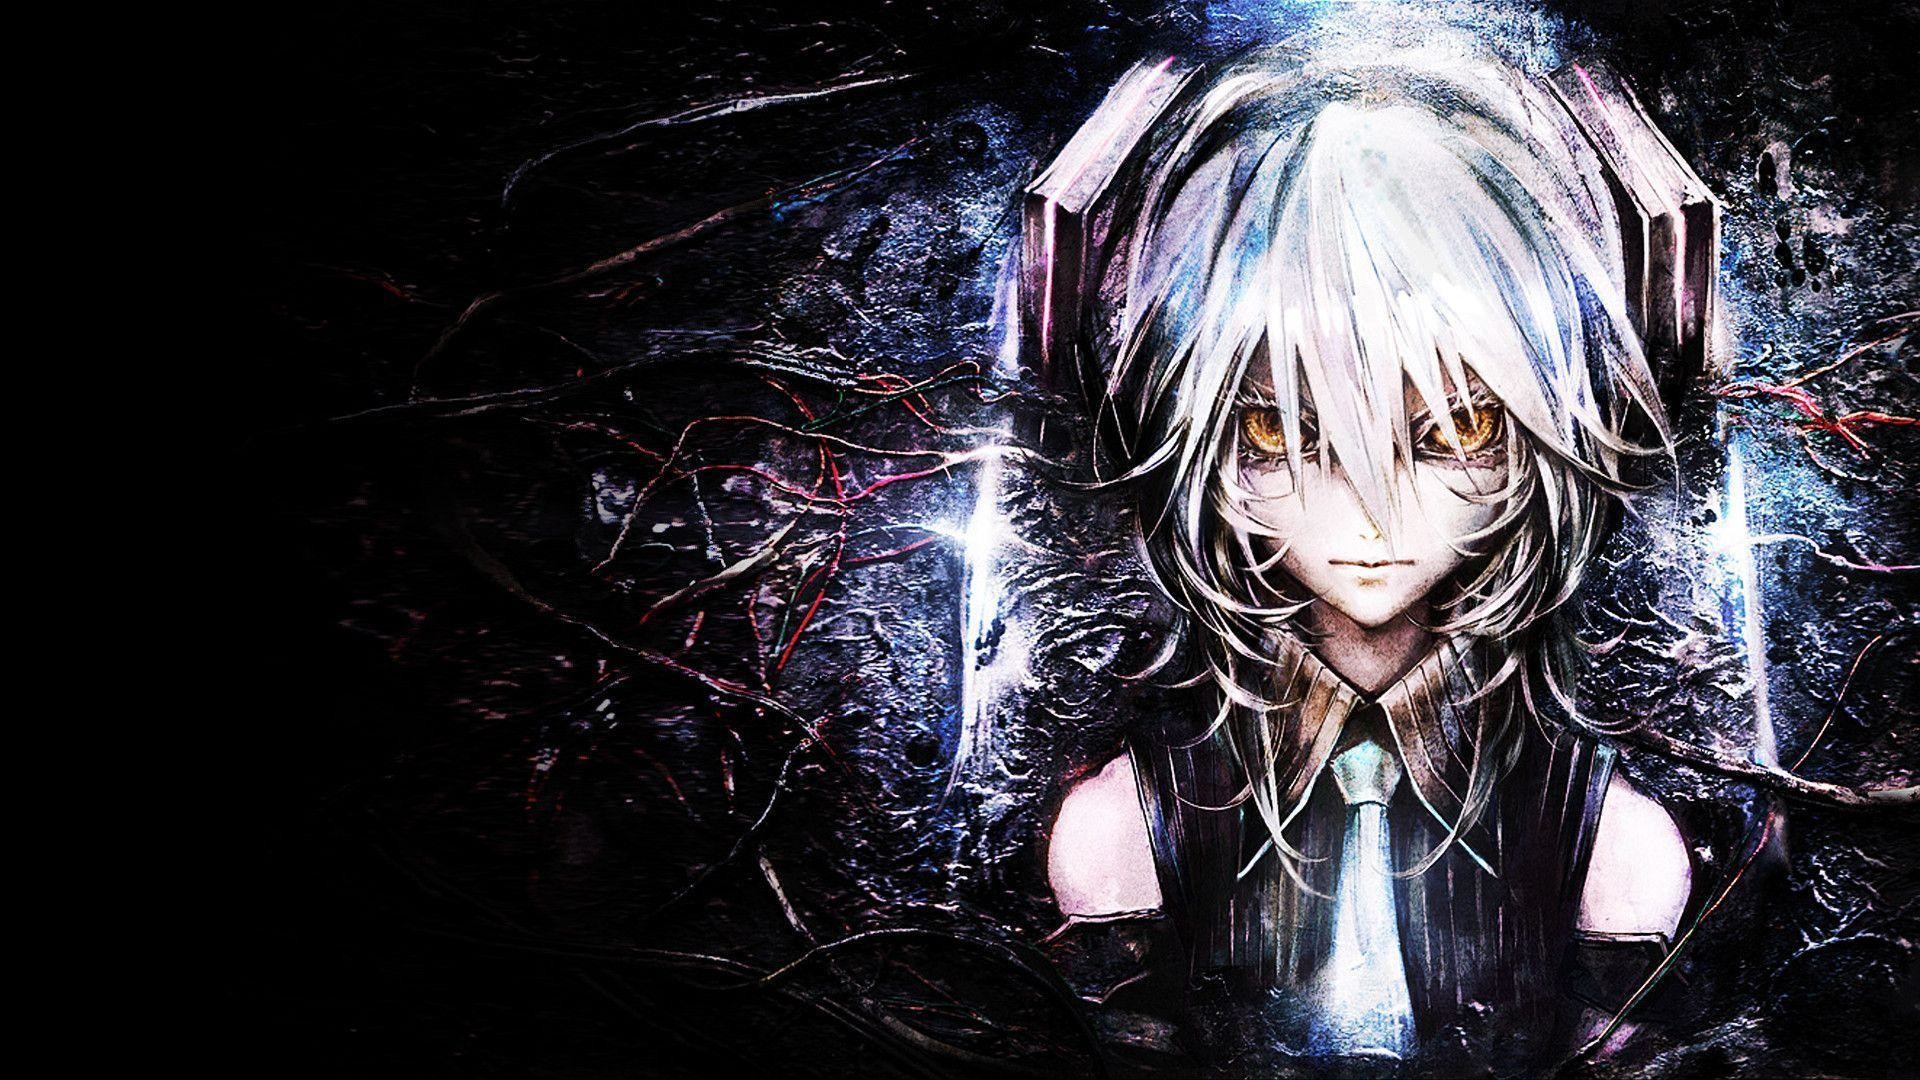 Anime 1920x1080 Resolution Wallpapers Laptop Full HD 1080P